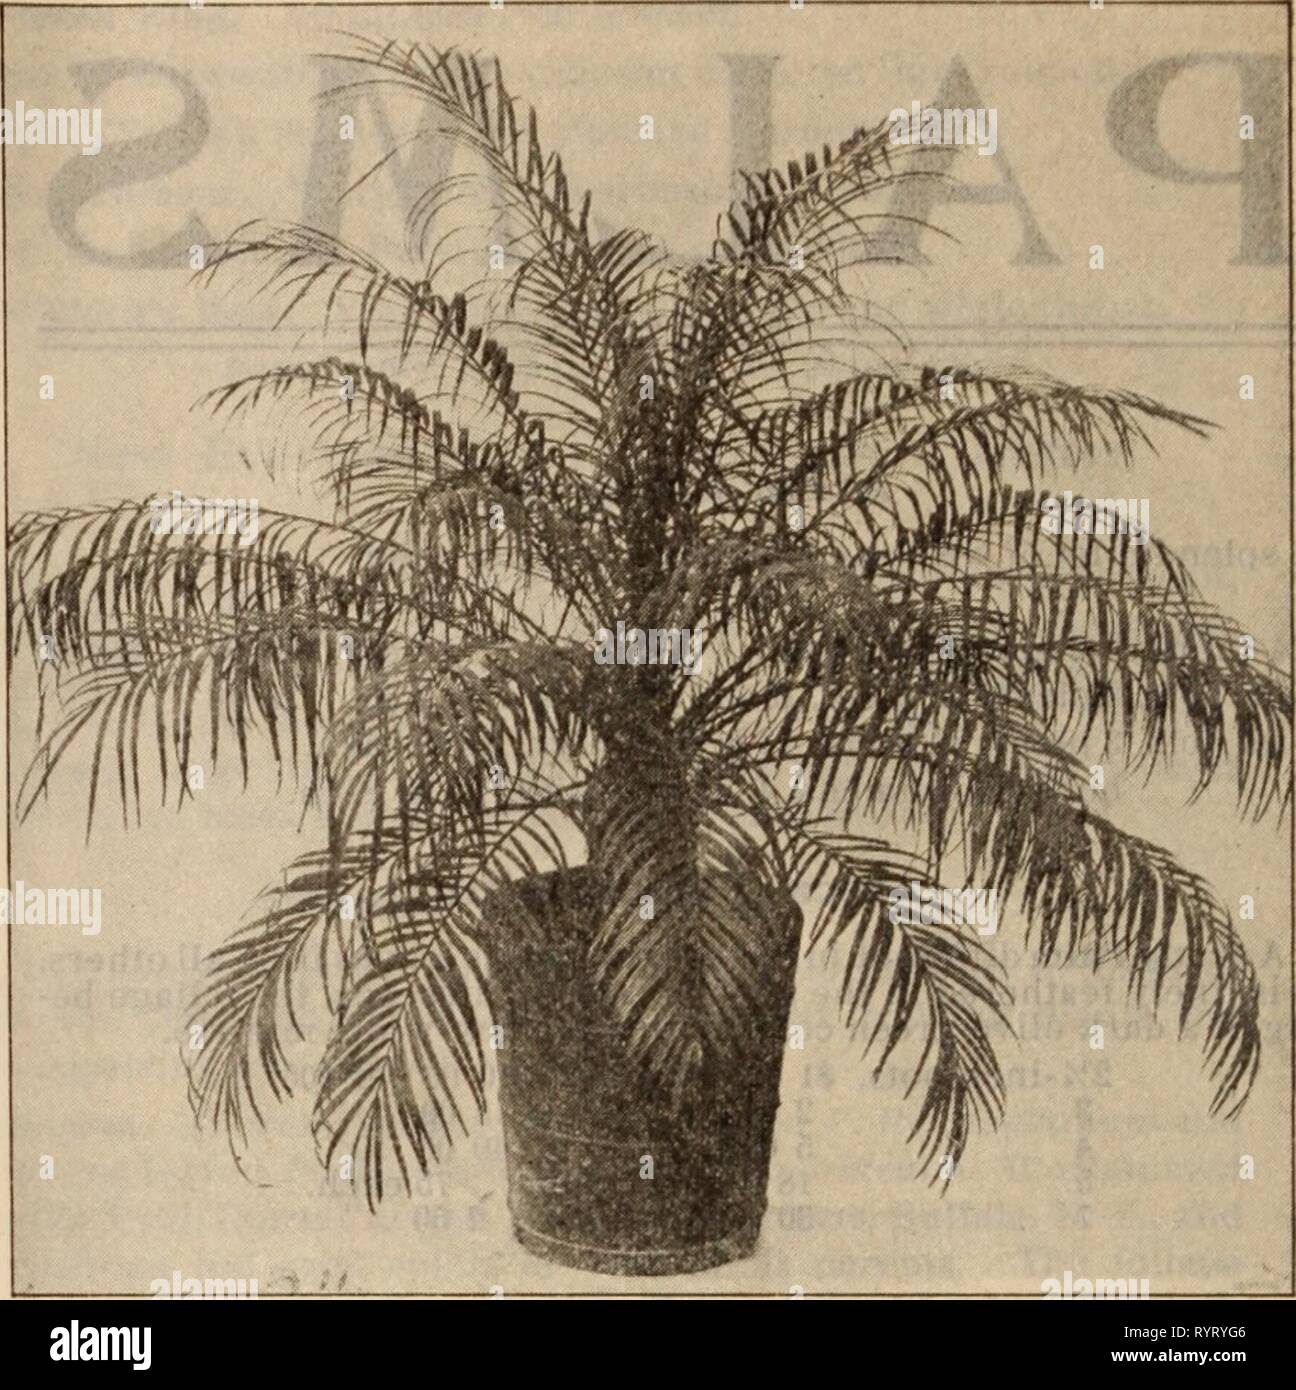 Dreer's wholesale price list  Dreer's wholesale price list / Henry A. Dreer. . dreerswholesalep1912dree Year:   KENTIA BELMOREANA PALiVlS (Continued; Kentia Forsteriana. Doz. 100 1000 2'/4-in. pots, 3 4 leaves, 8 to 10 in. high . . 12 to 15 ' . . $1 50 $10 00 $90 00 4to5' 5 to 6' . . 2 00 15 00 140 00 5 20 to 24 ' . . . . 9 00 Each 75 00 6 6' 28 to 30 ' . . 1 00 6 6' 34 to 36 ' . . 1 50 7 6to7' 38 to 40 ' . . 2 50 8-inch tubs, 8 6 to 7' 45 to 48 ' . . 4 00 6to7' 48 ' . . 5 00 10 6 to 7' iVi to 5ft. high . . 5to5'/2 ' . . . . 6 00 11 6to7' . . 8 00 10 6to7' 5'/2to6 ' . . . . 10 00 11 6to7' 6 '  Stock Photo